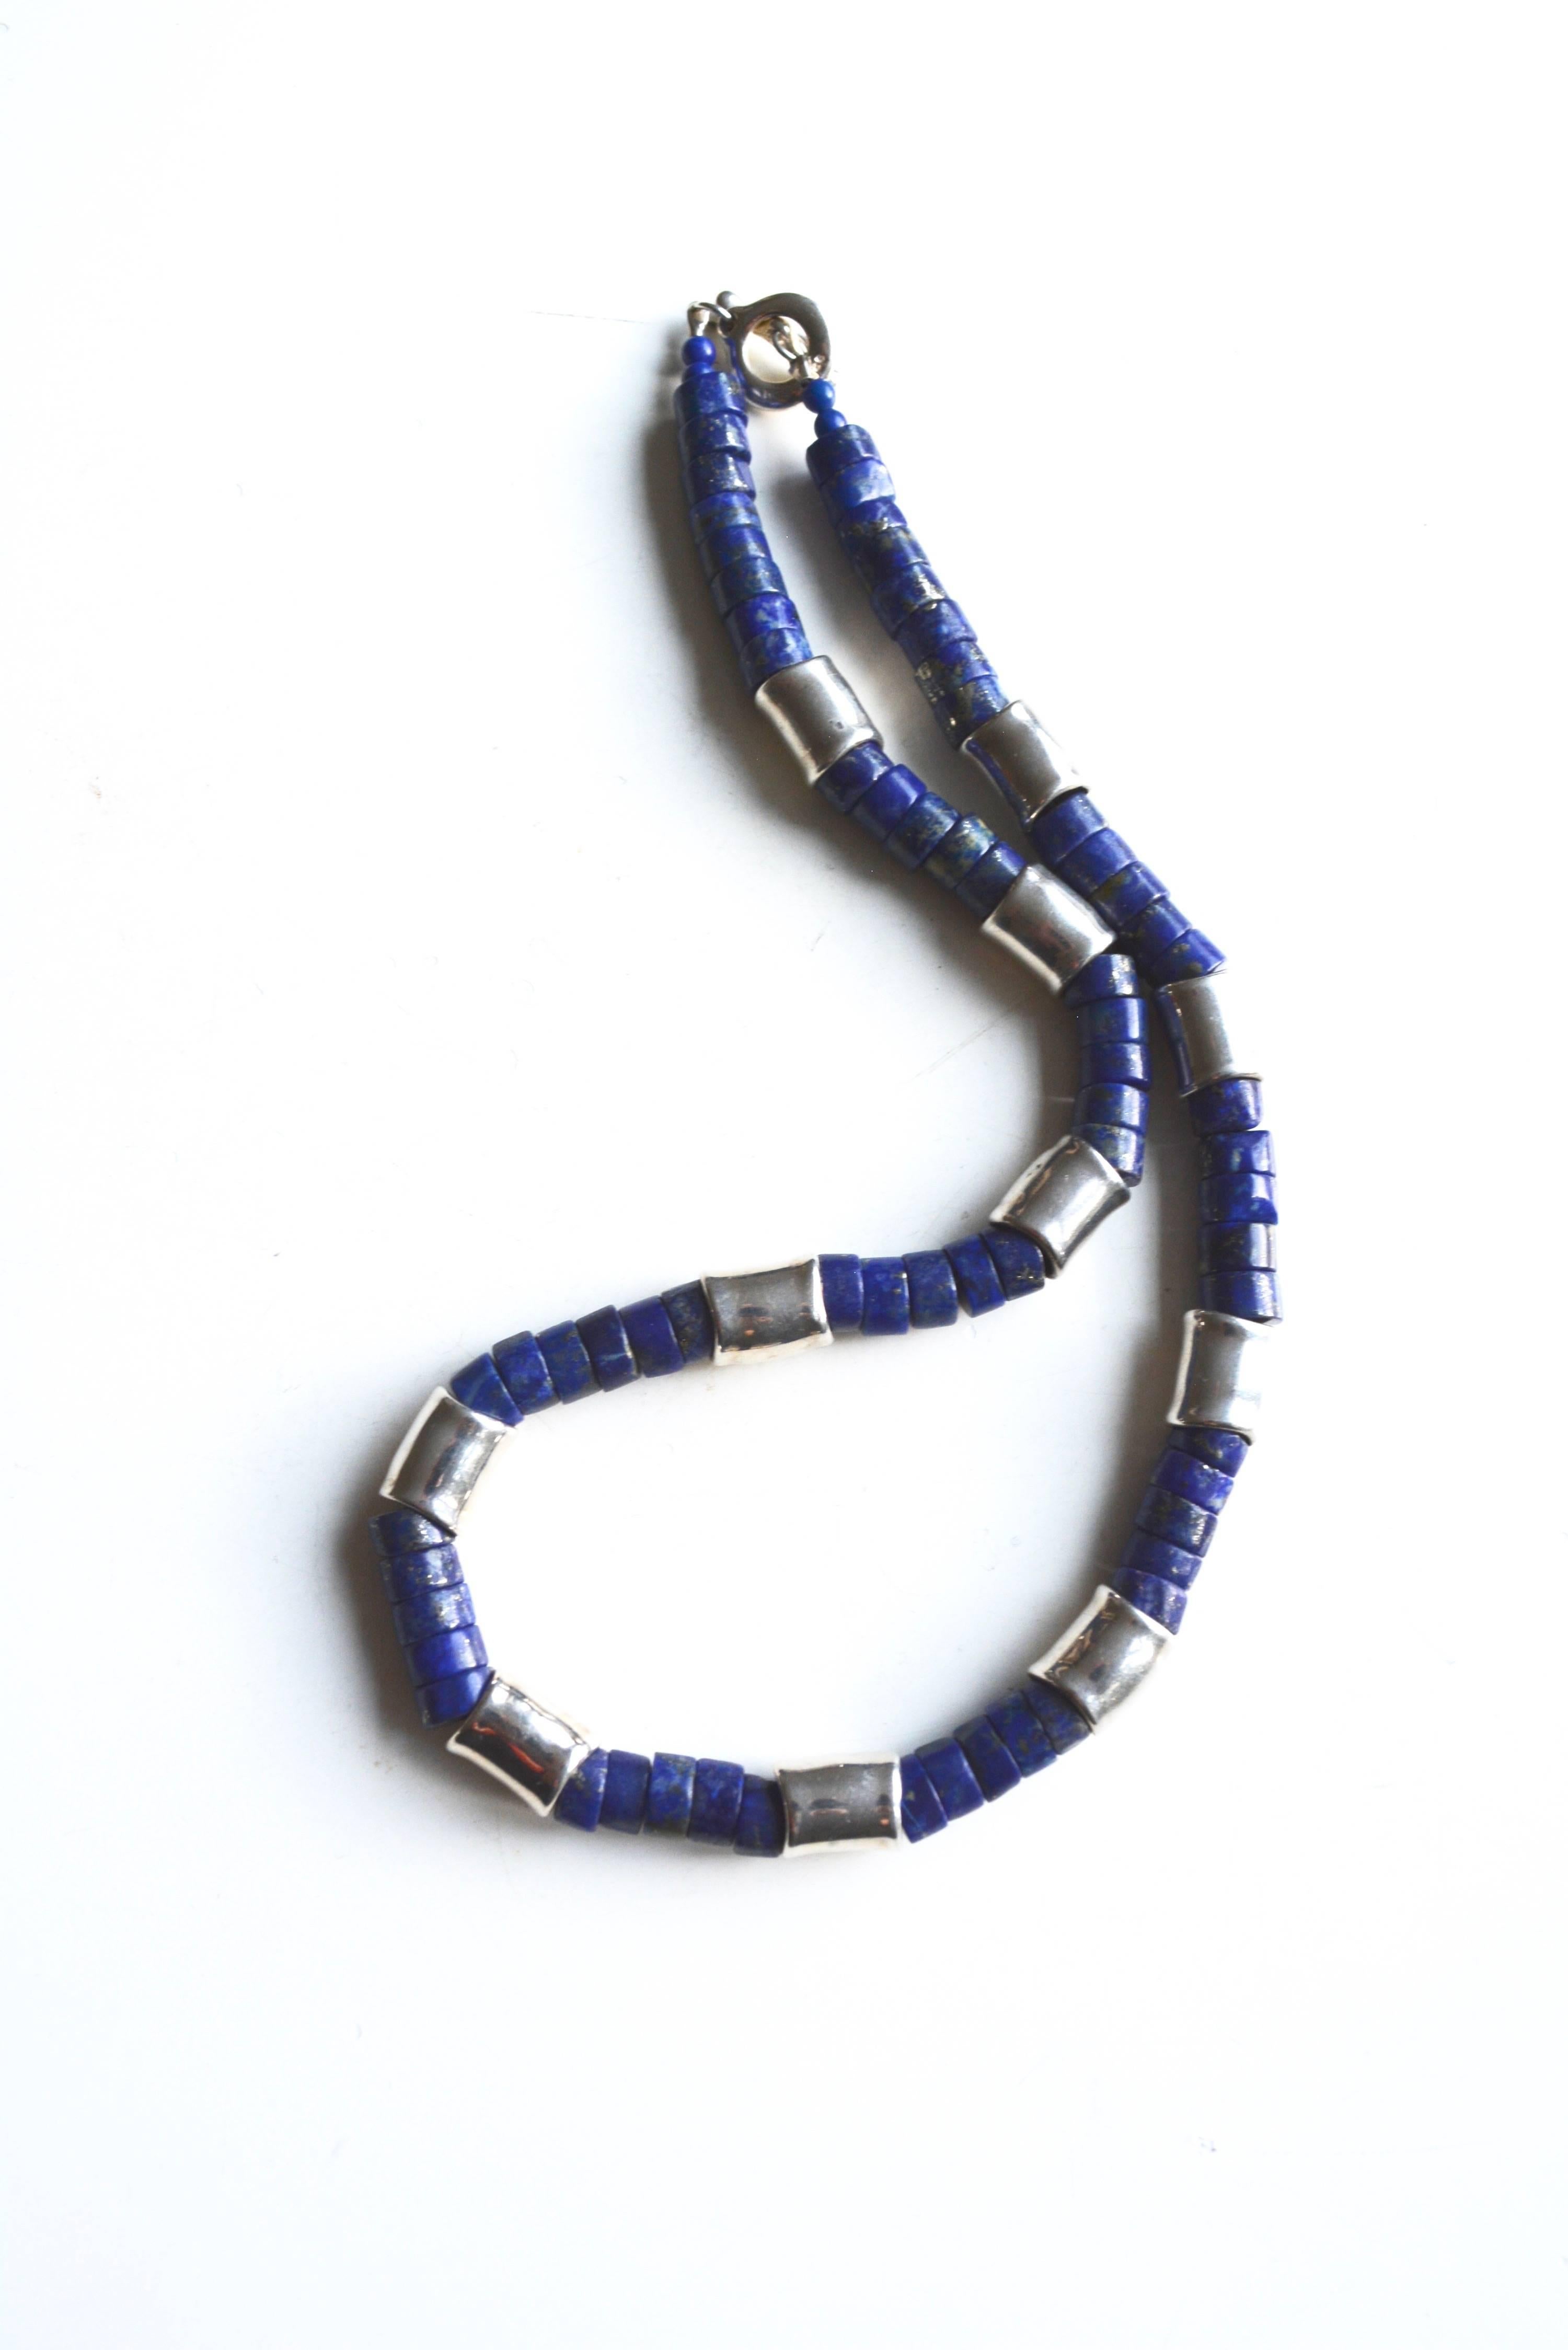 Signed RLM sterling lapis bead necklace. 18" long. 